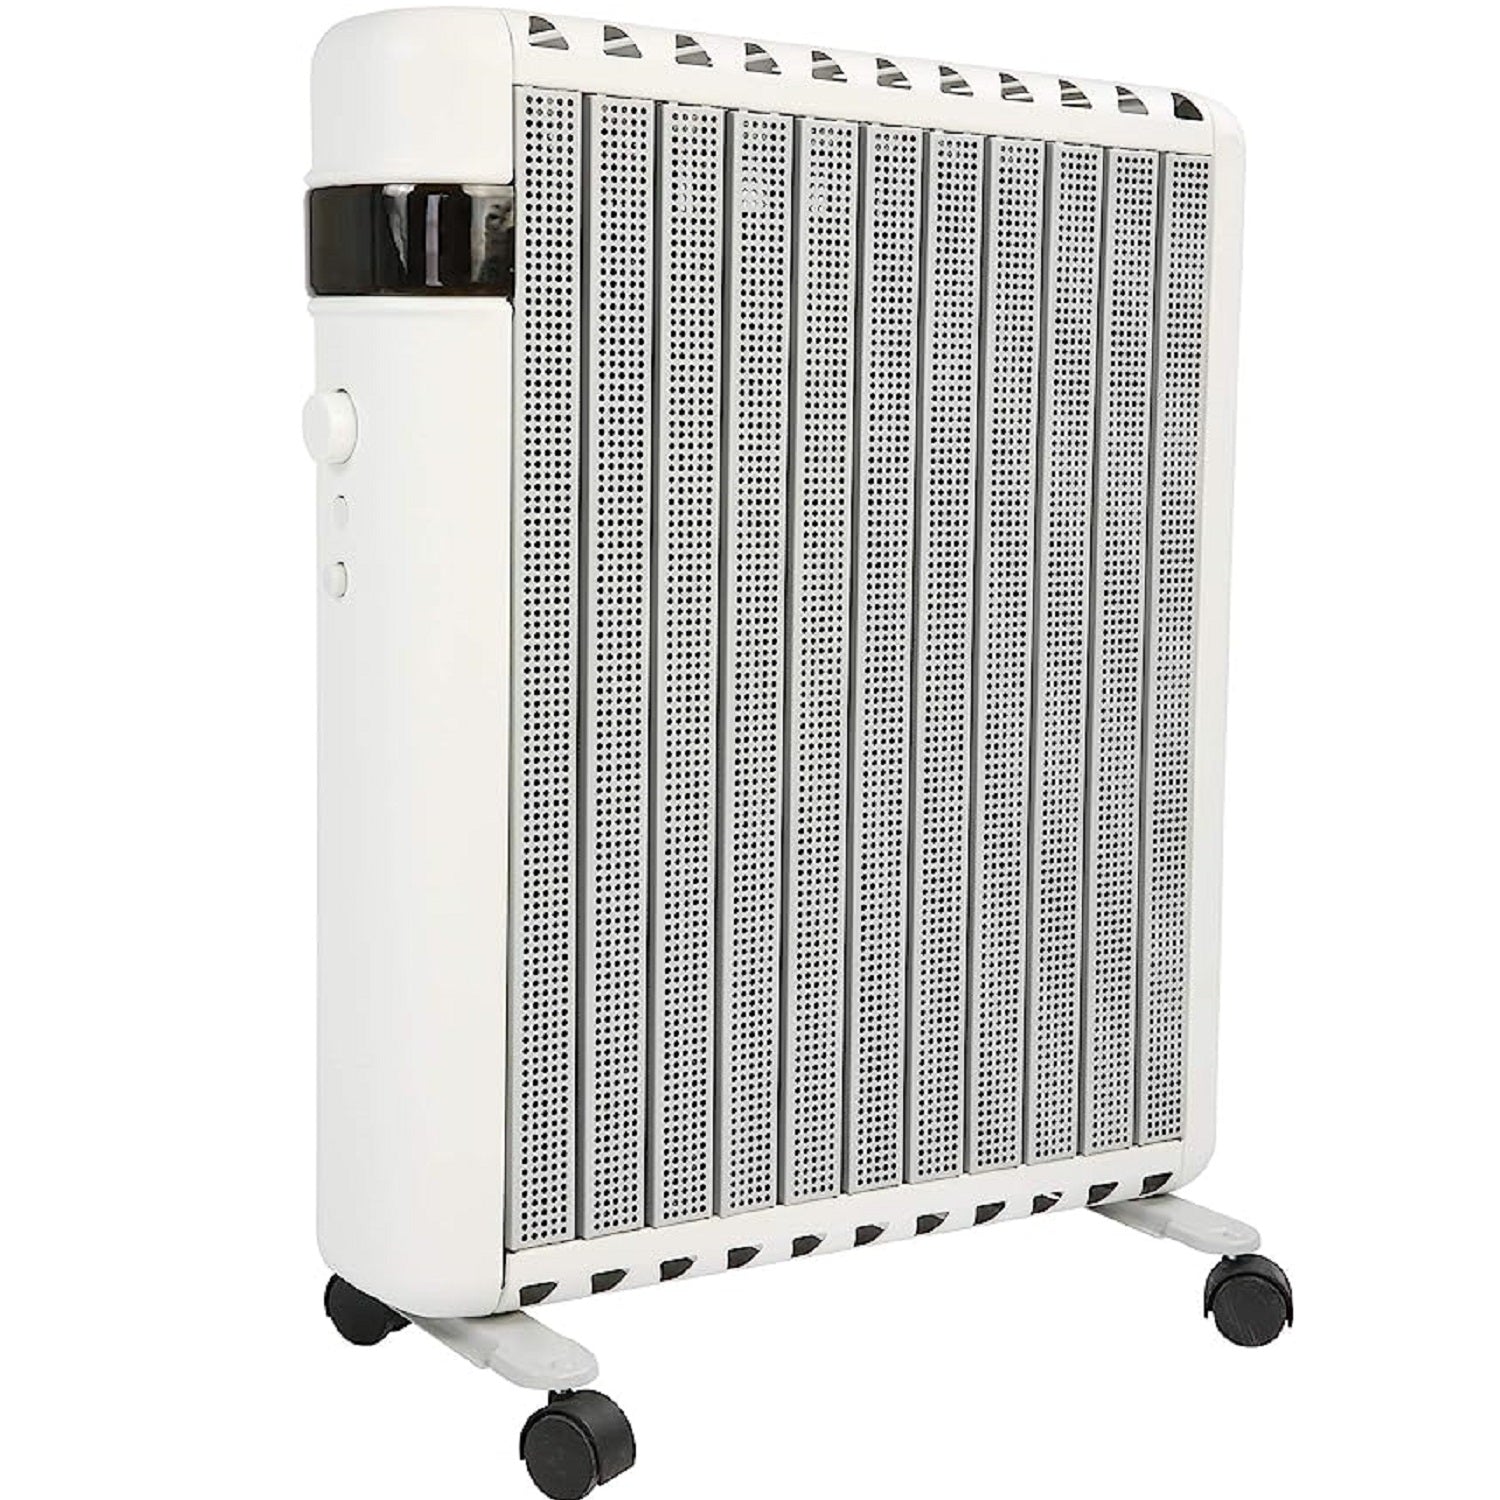 Portable Space Heater, 1500w Adjustable Thermostat with Overheat Protection and Tip-over Protection